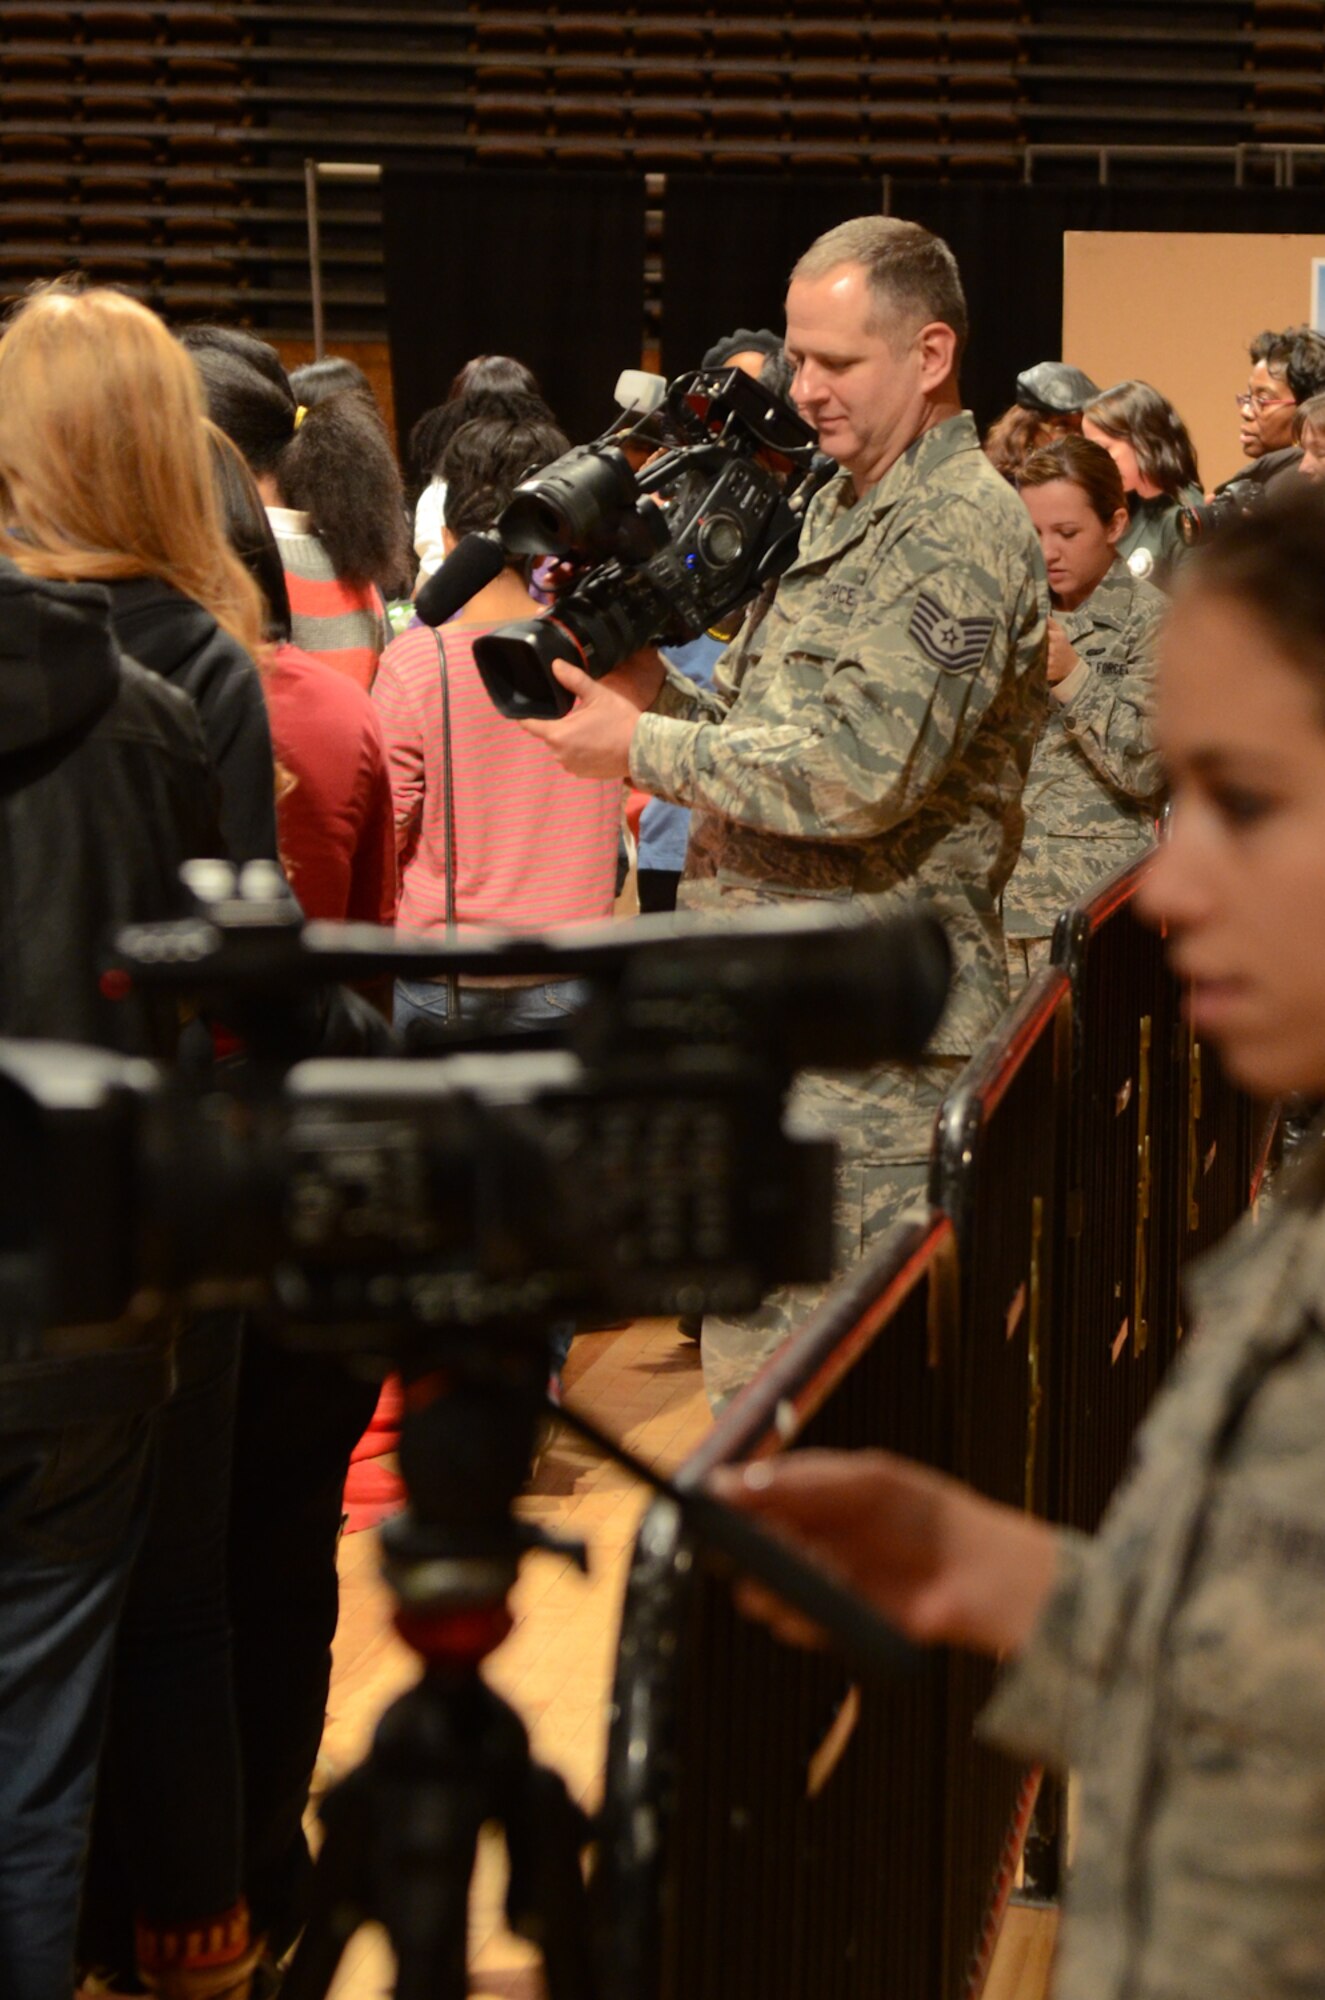 Tech. Sgt. Kevin Coulter, a combat correspondent from the Colorado Air National Guard, documents events at the District of Columbia National Guard Armory in Washington, D.C., Jan. 19, 2013. Public Affairs Guardsmen from across the country are deployed in support of the 57th Presidential Inauguration. (U.S. Air Force photo/Tech. Sgt. Michael Crane)